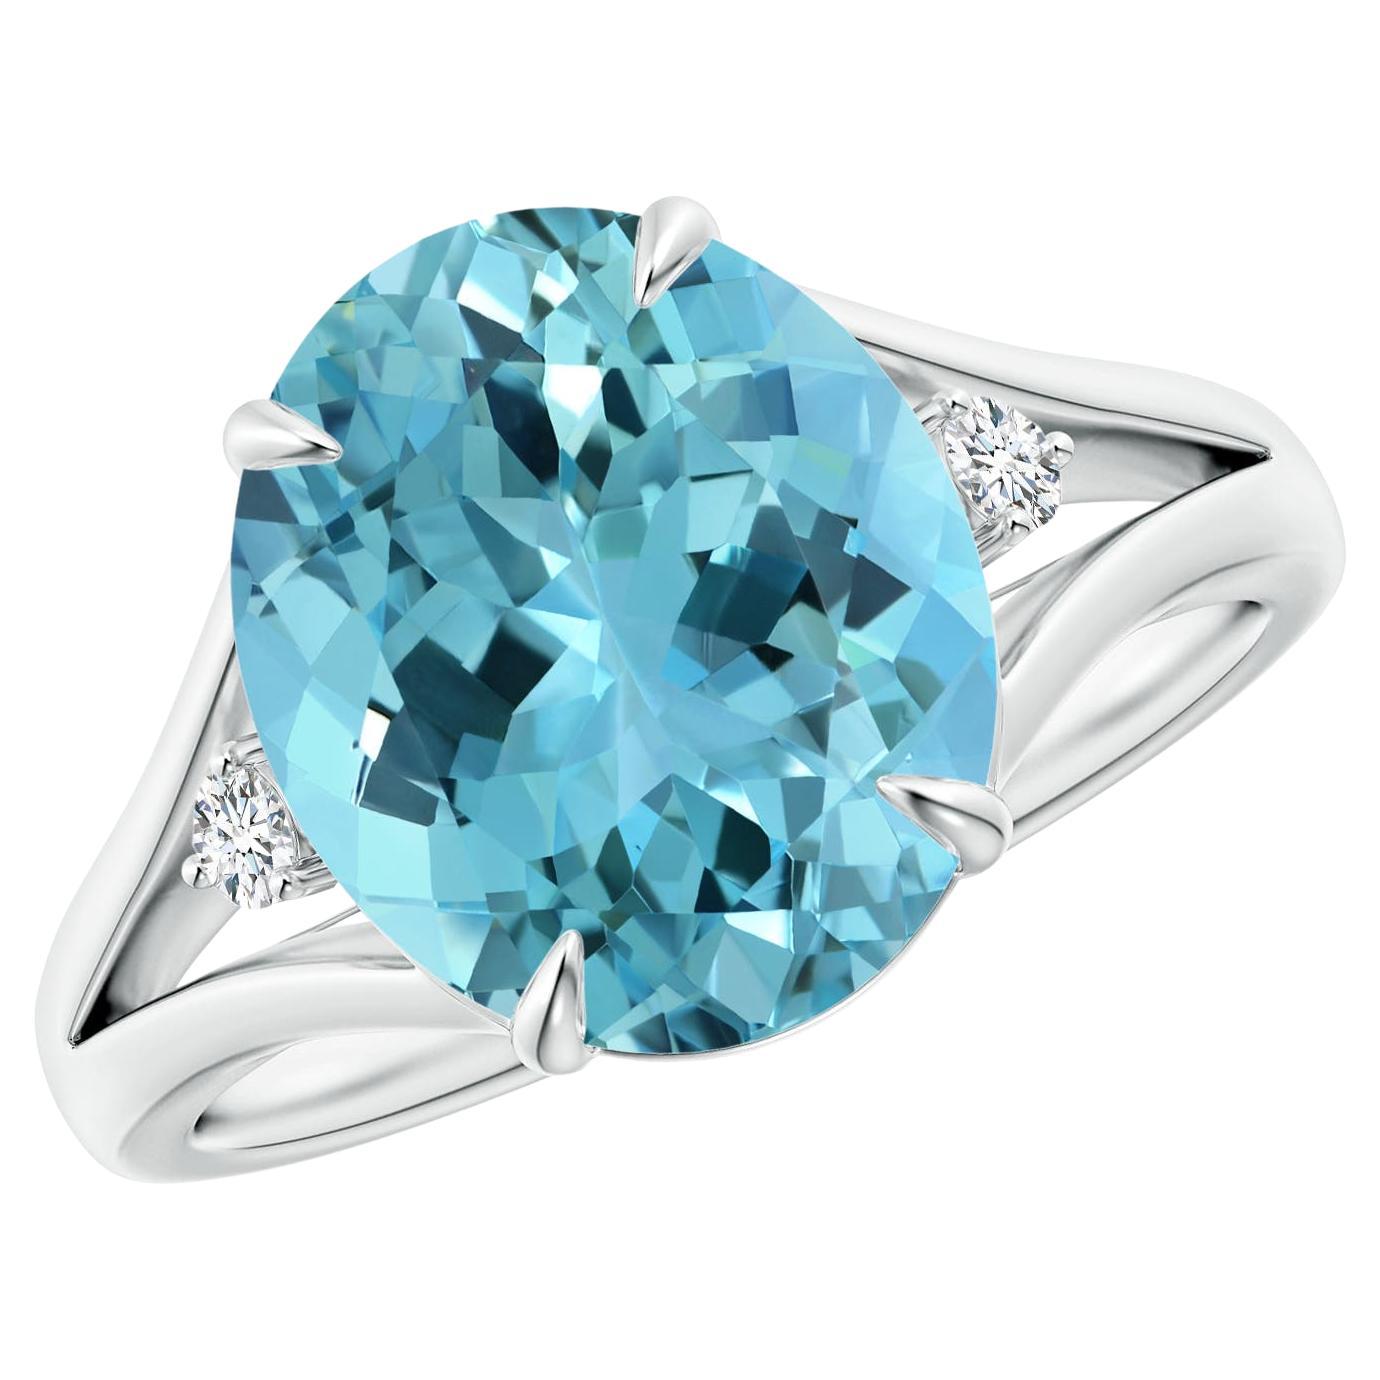 For Sale:  ANGARA GIA Certified Natural Aquamarine Ring in White Gold with Diamond Accents